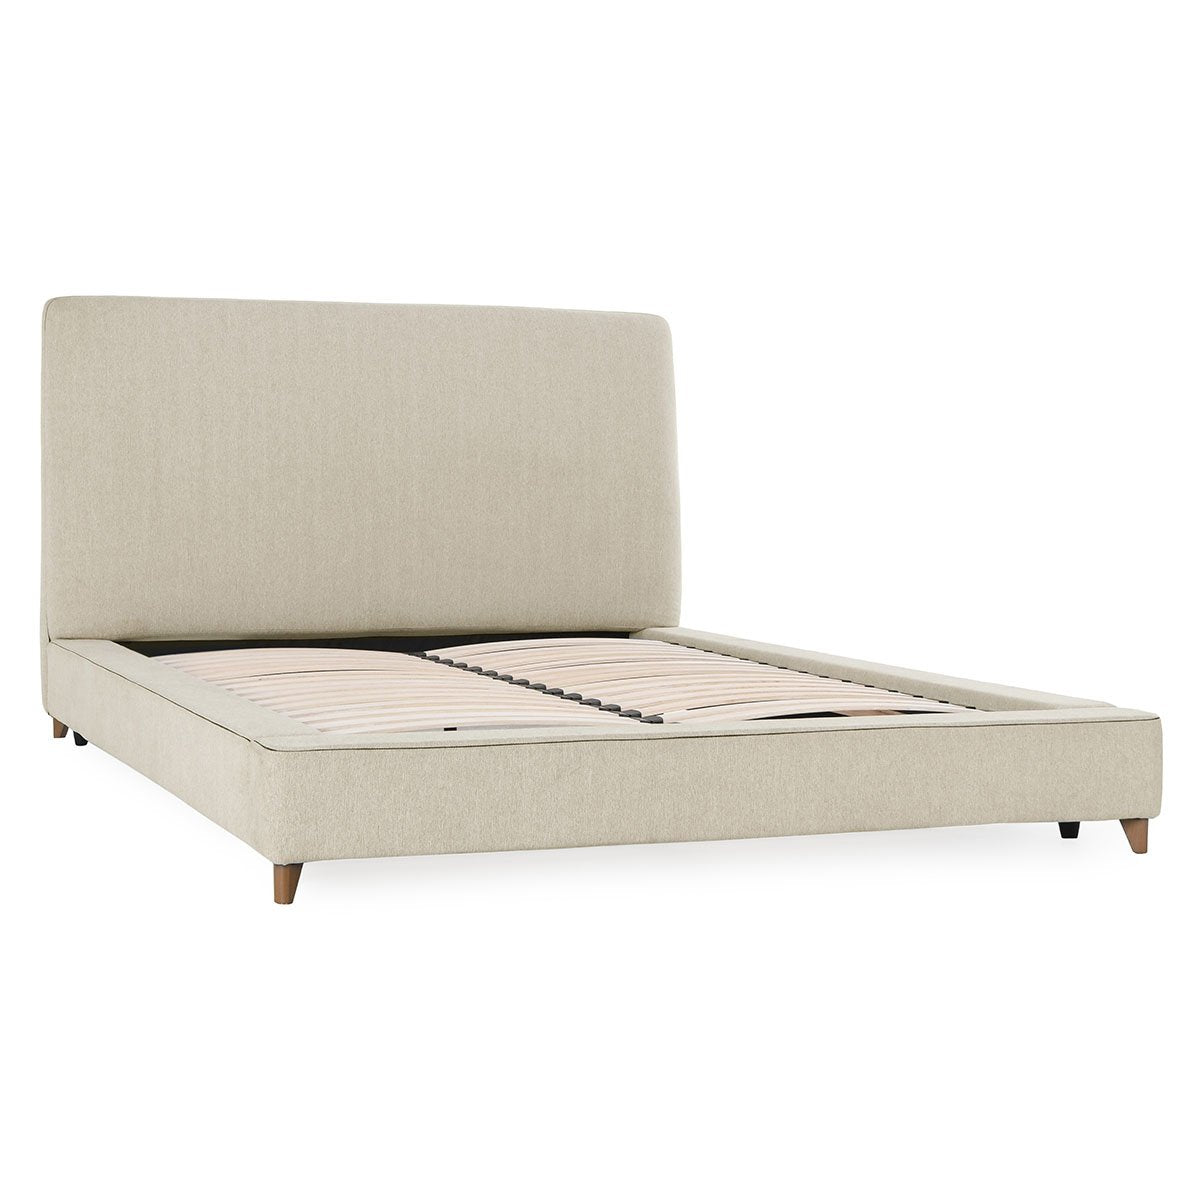 Tate Upholstered King Bed